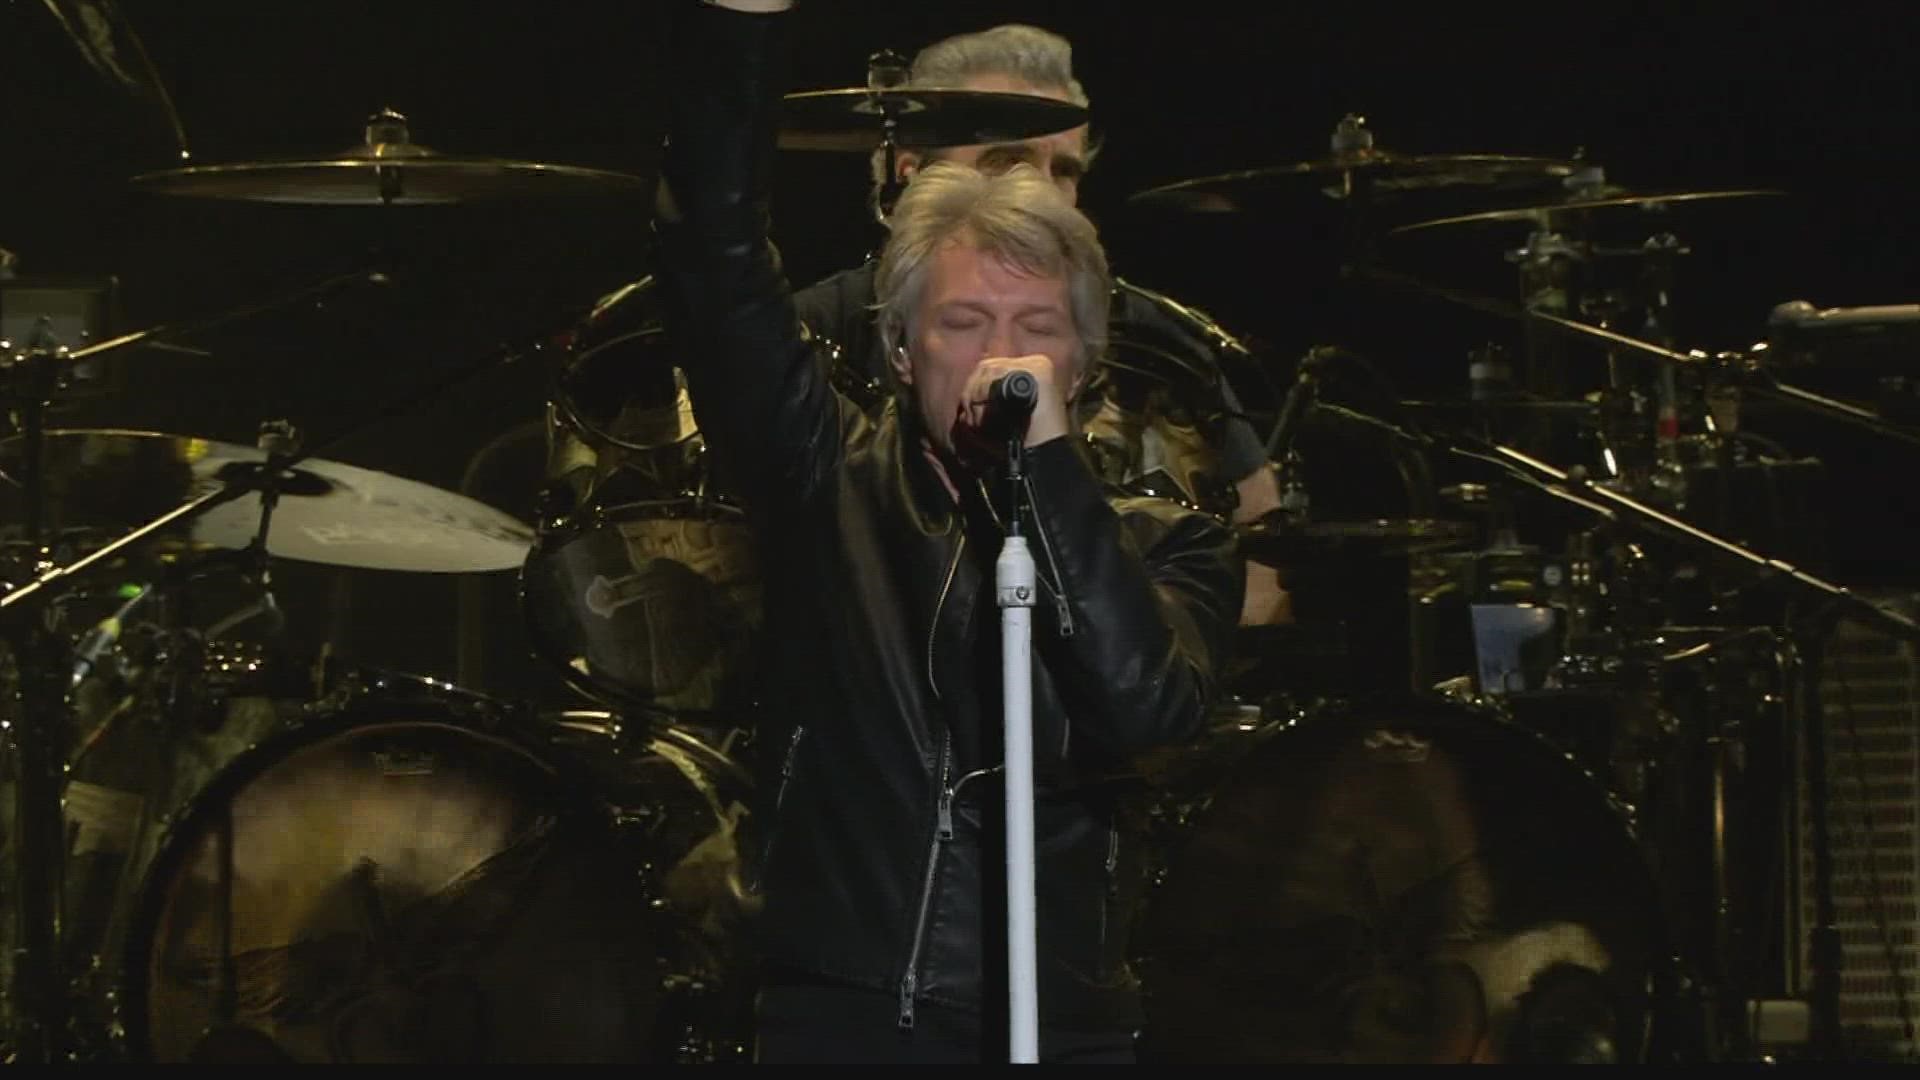 Rock and Roll Hall of Fame band Bon Jovi is headed out on a North American tour, and there will be a stop in Indianapolis.